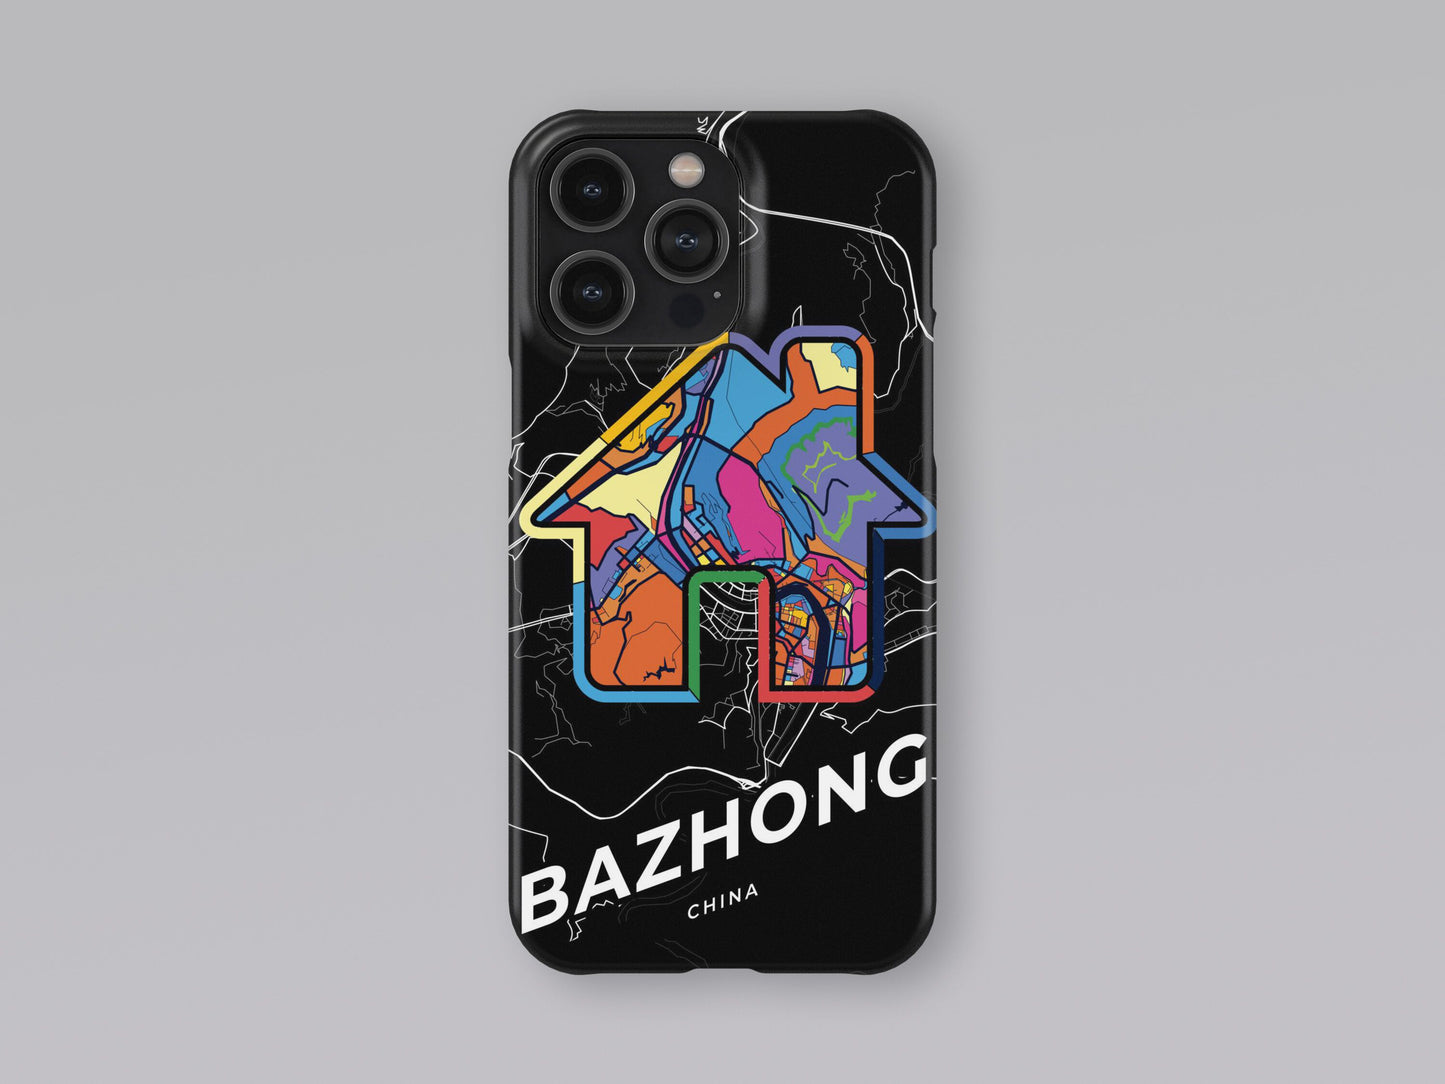 Bazhong China slim phone case with colorful icon. Birthday, wedding or housewarming gift. Couple match cases. 3